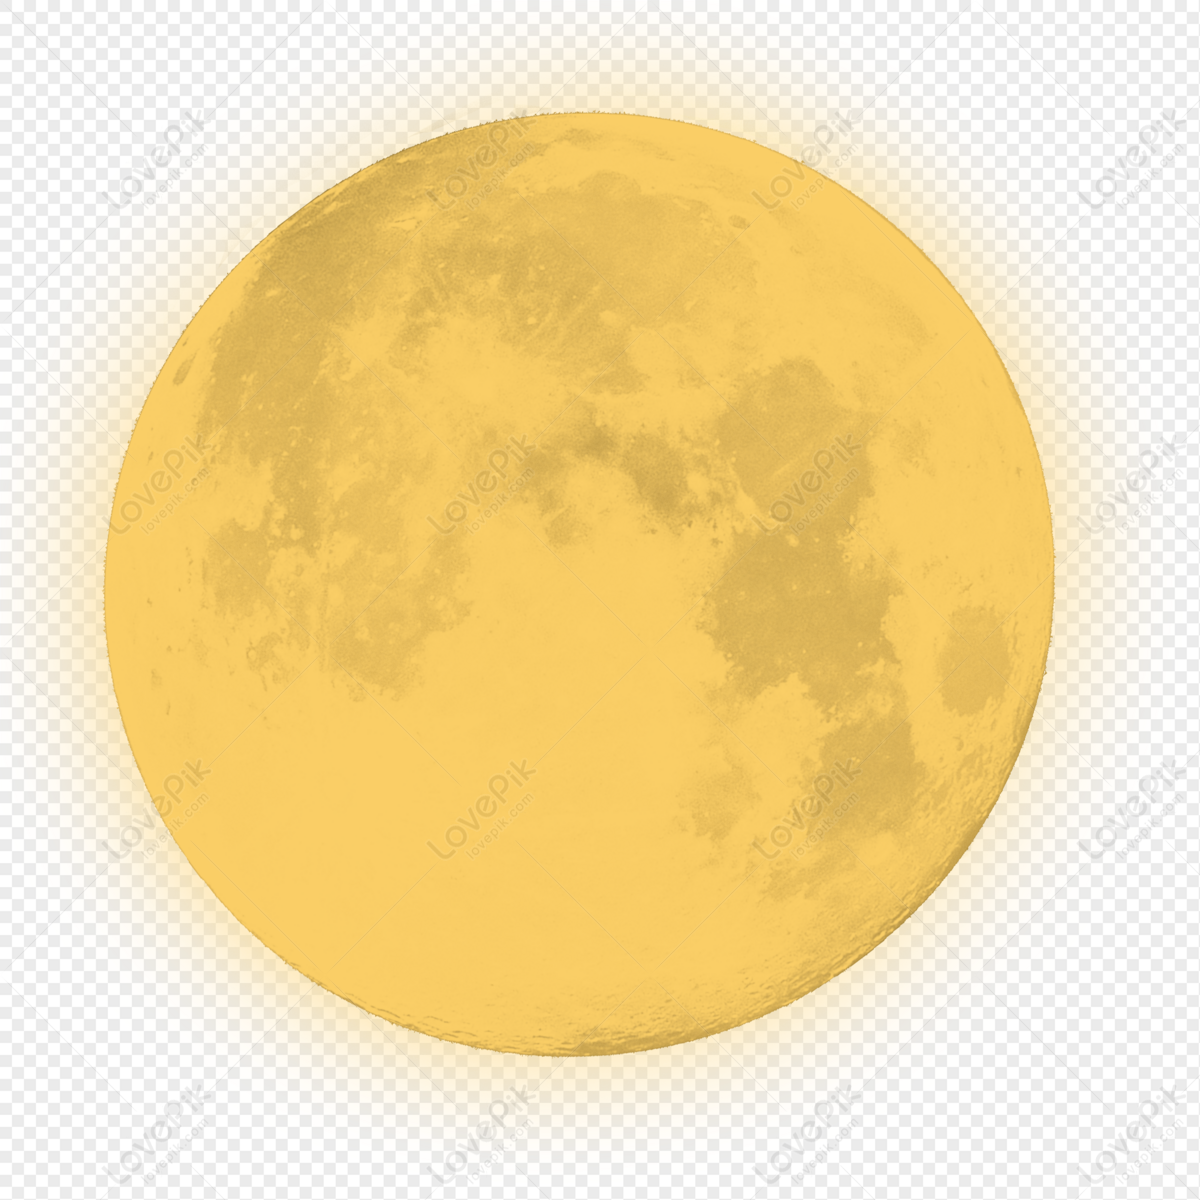 Glowing Moon Vector Illustration PNG Images